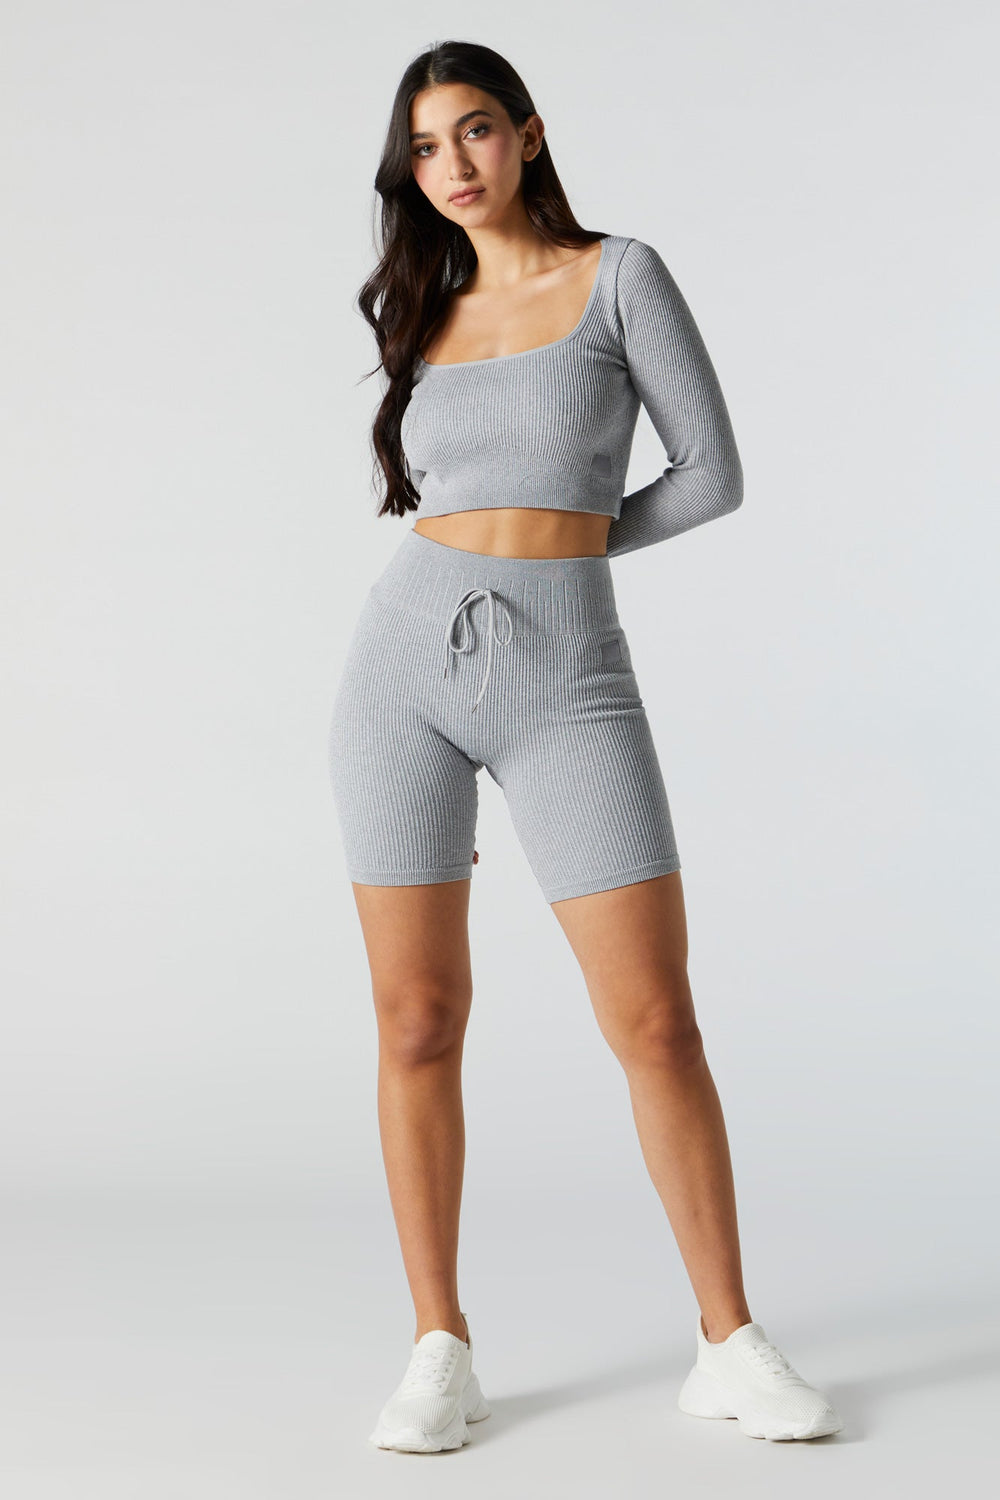 Grey Sommer Ray Active Seamless Long Sleeve Top Grey Sommer Ray Active Seamless Long Sleeve Top 3